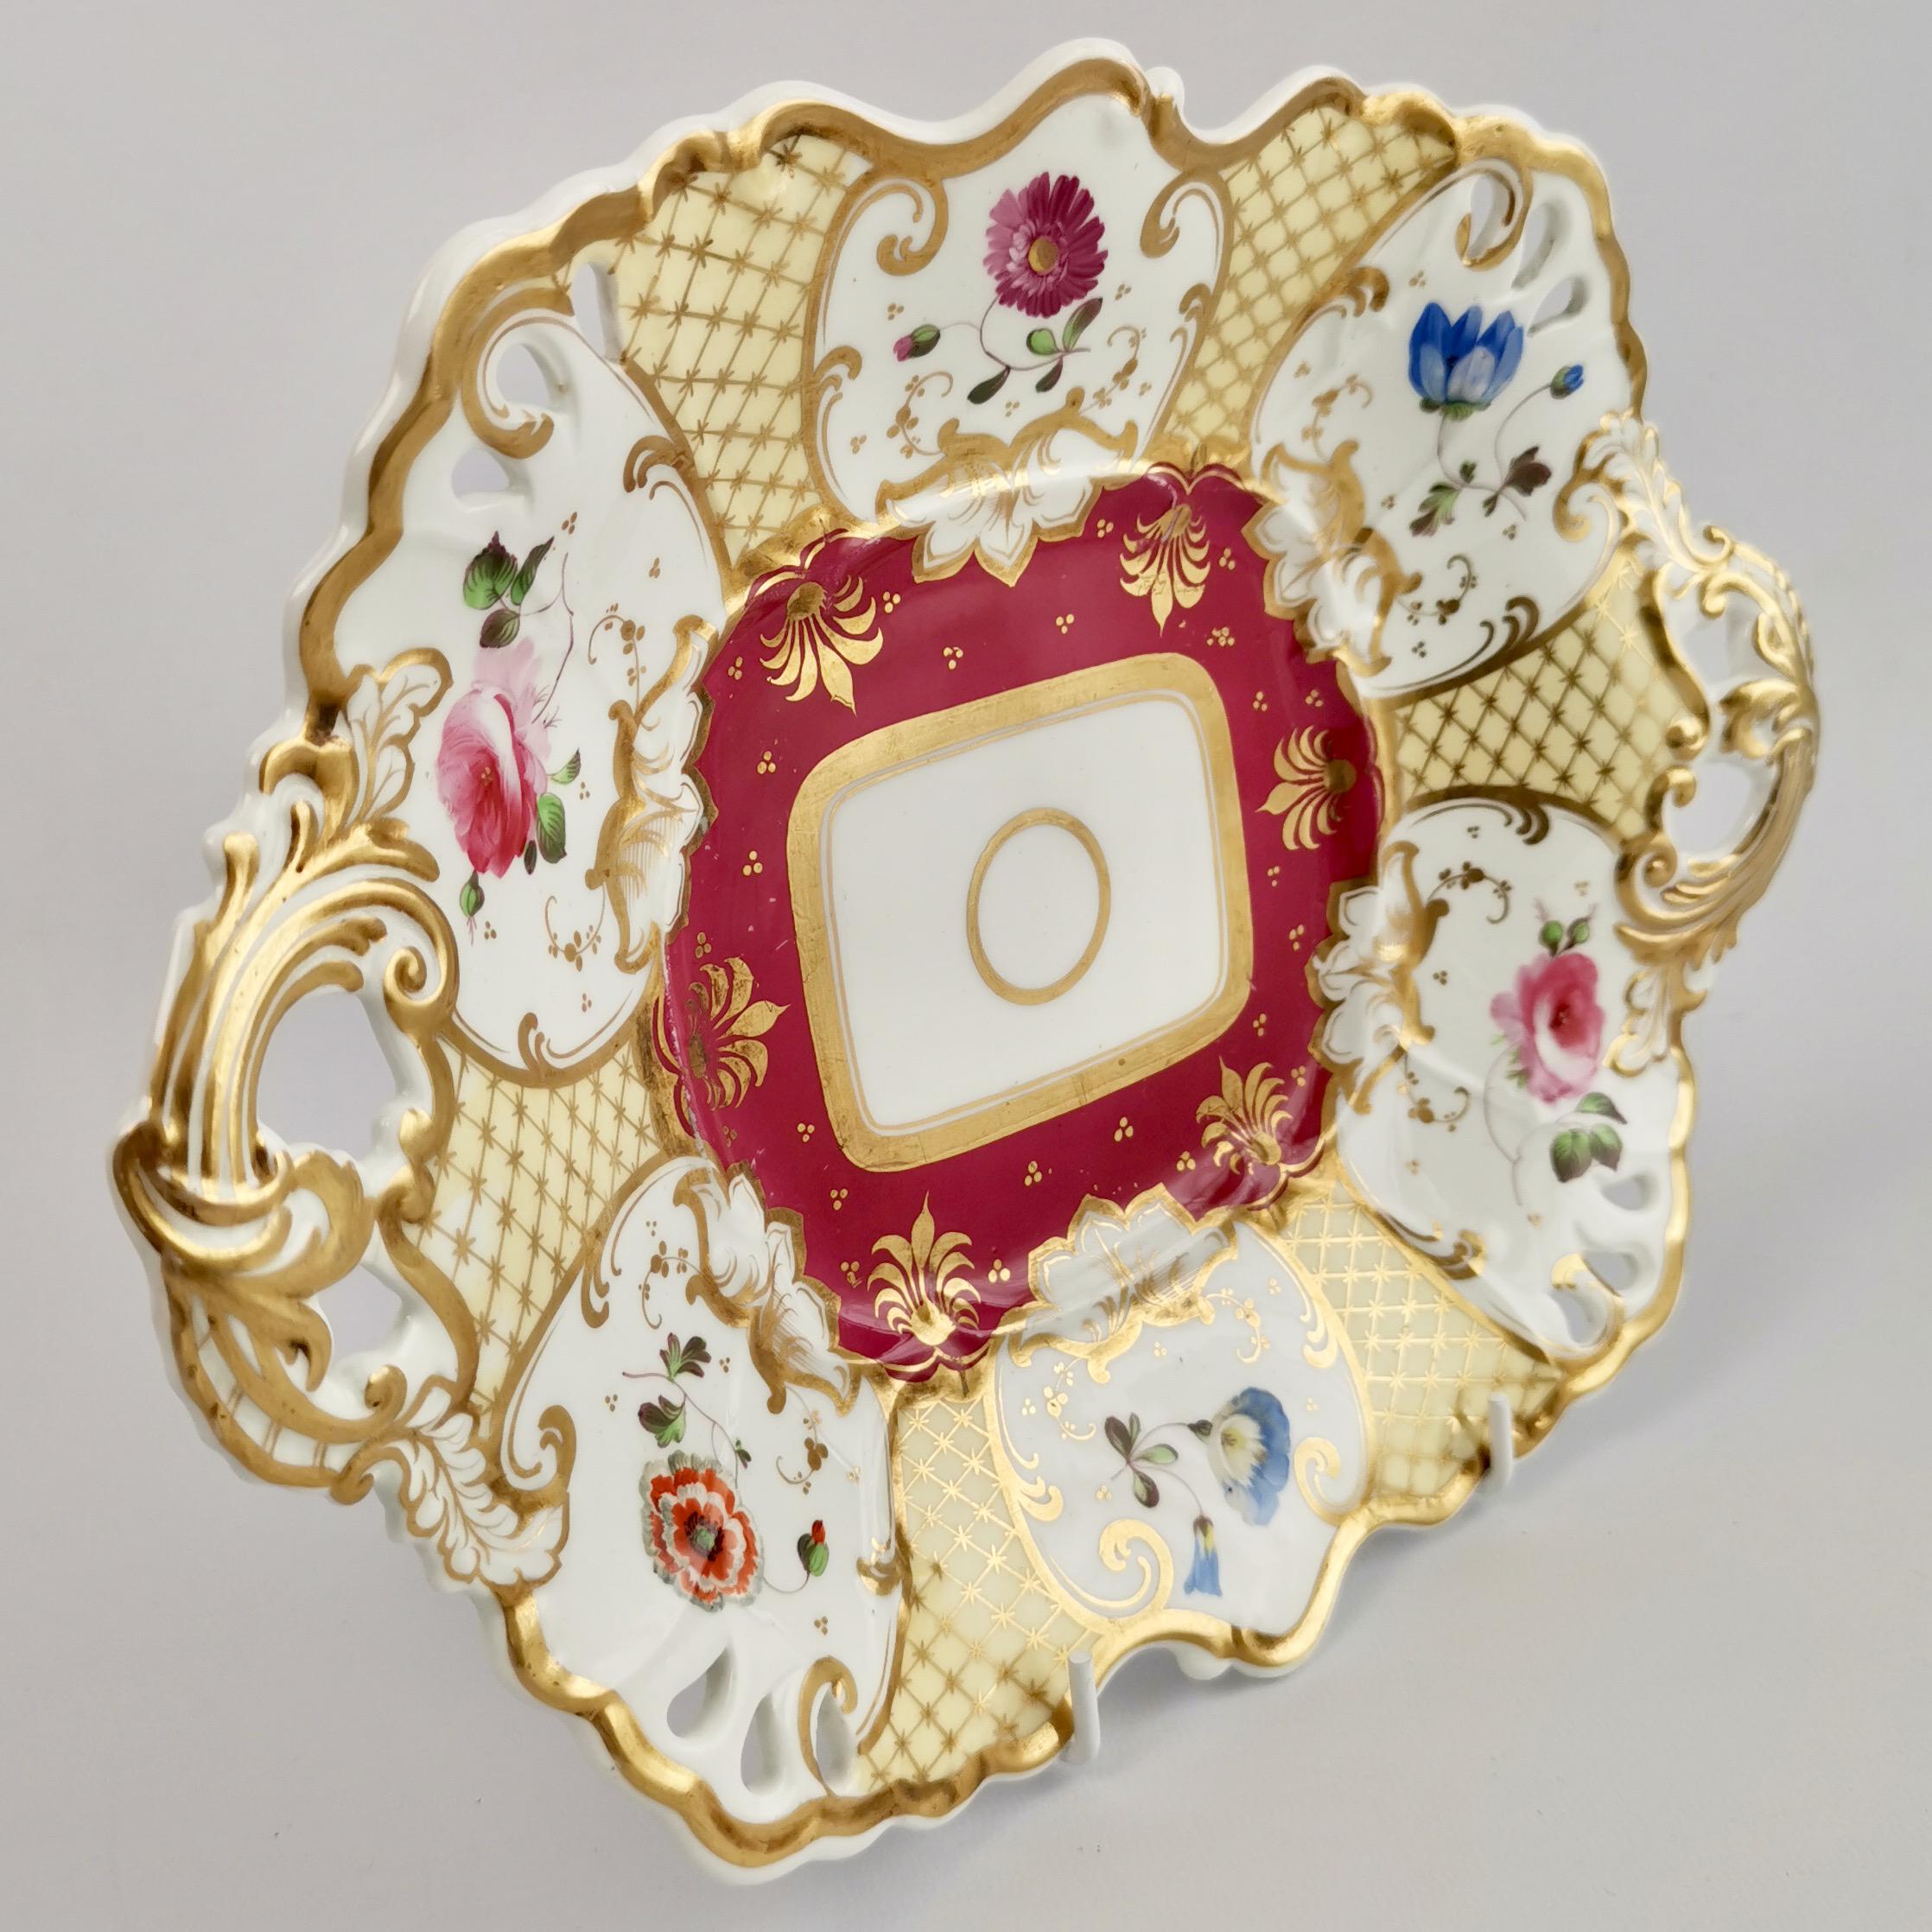 This is a very striking two-handled serving dish made by Samuel Alcock around the year 1835. The dish has a beautiful maroon and cream ground with rich gilding and beautiful hand painted flowers.

Samuel Alcock was one of the many potters in